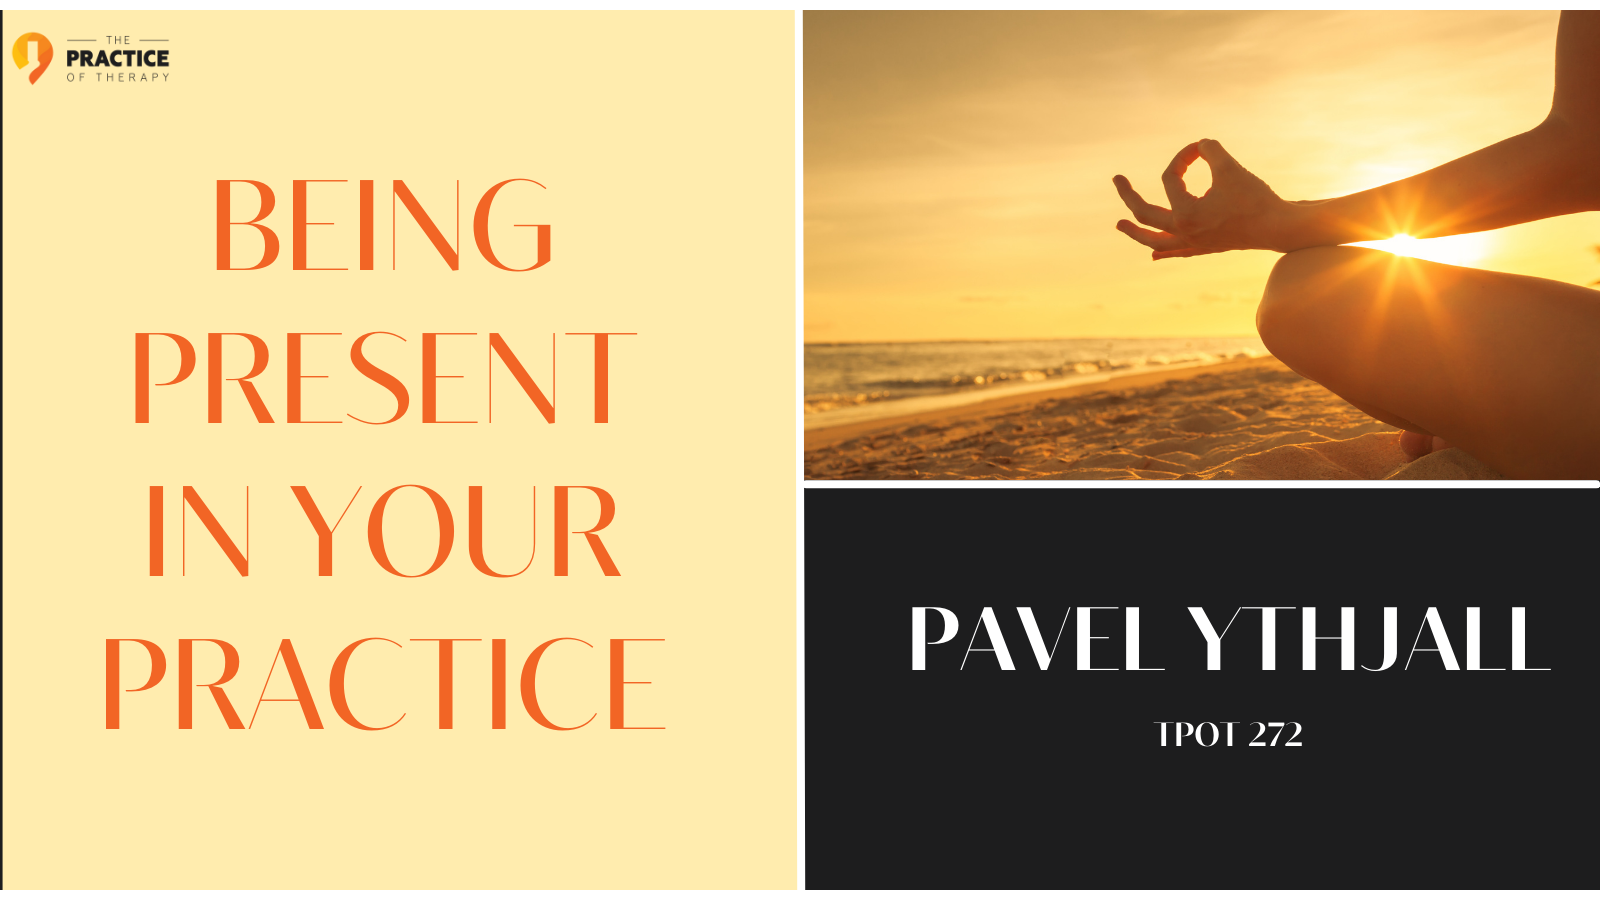 Pavel Ythjall | Being Present In Your Practice | TPOT 272